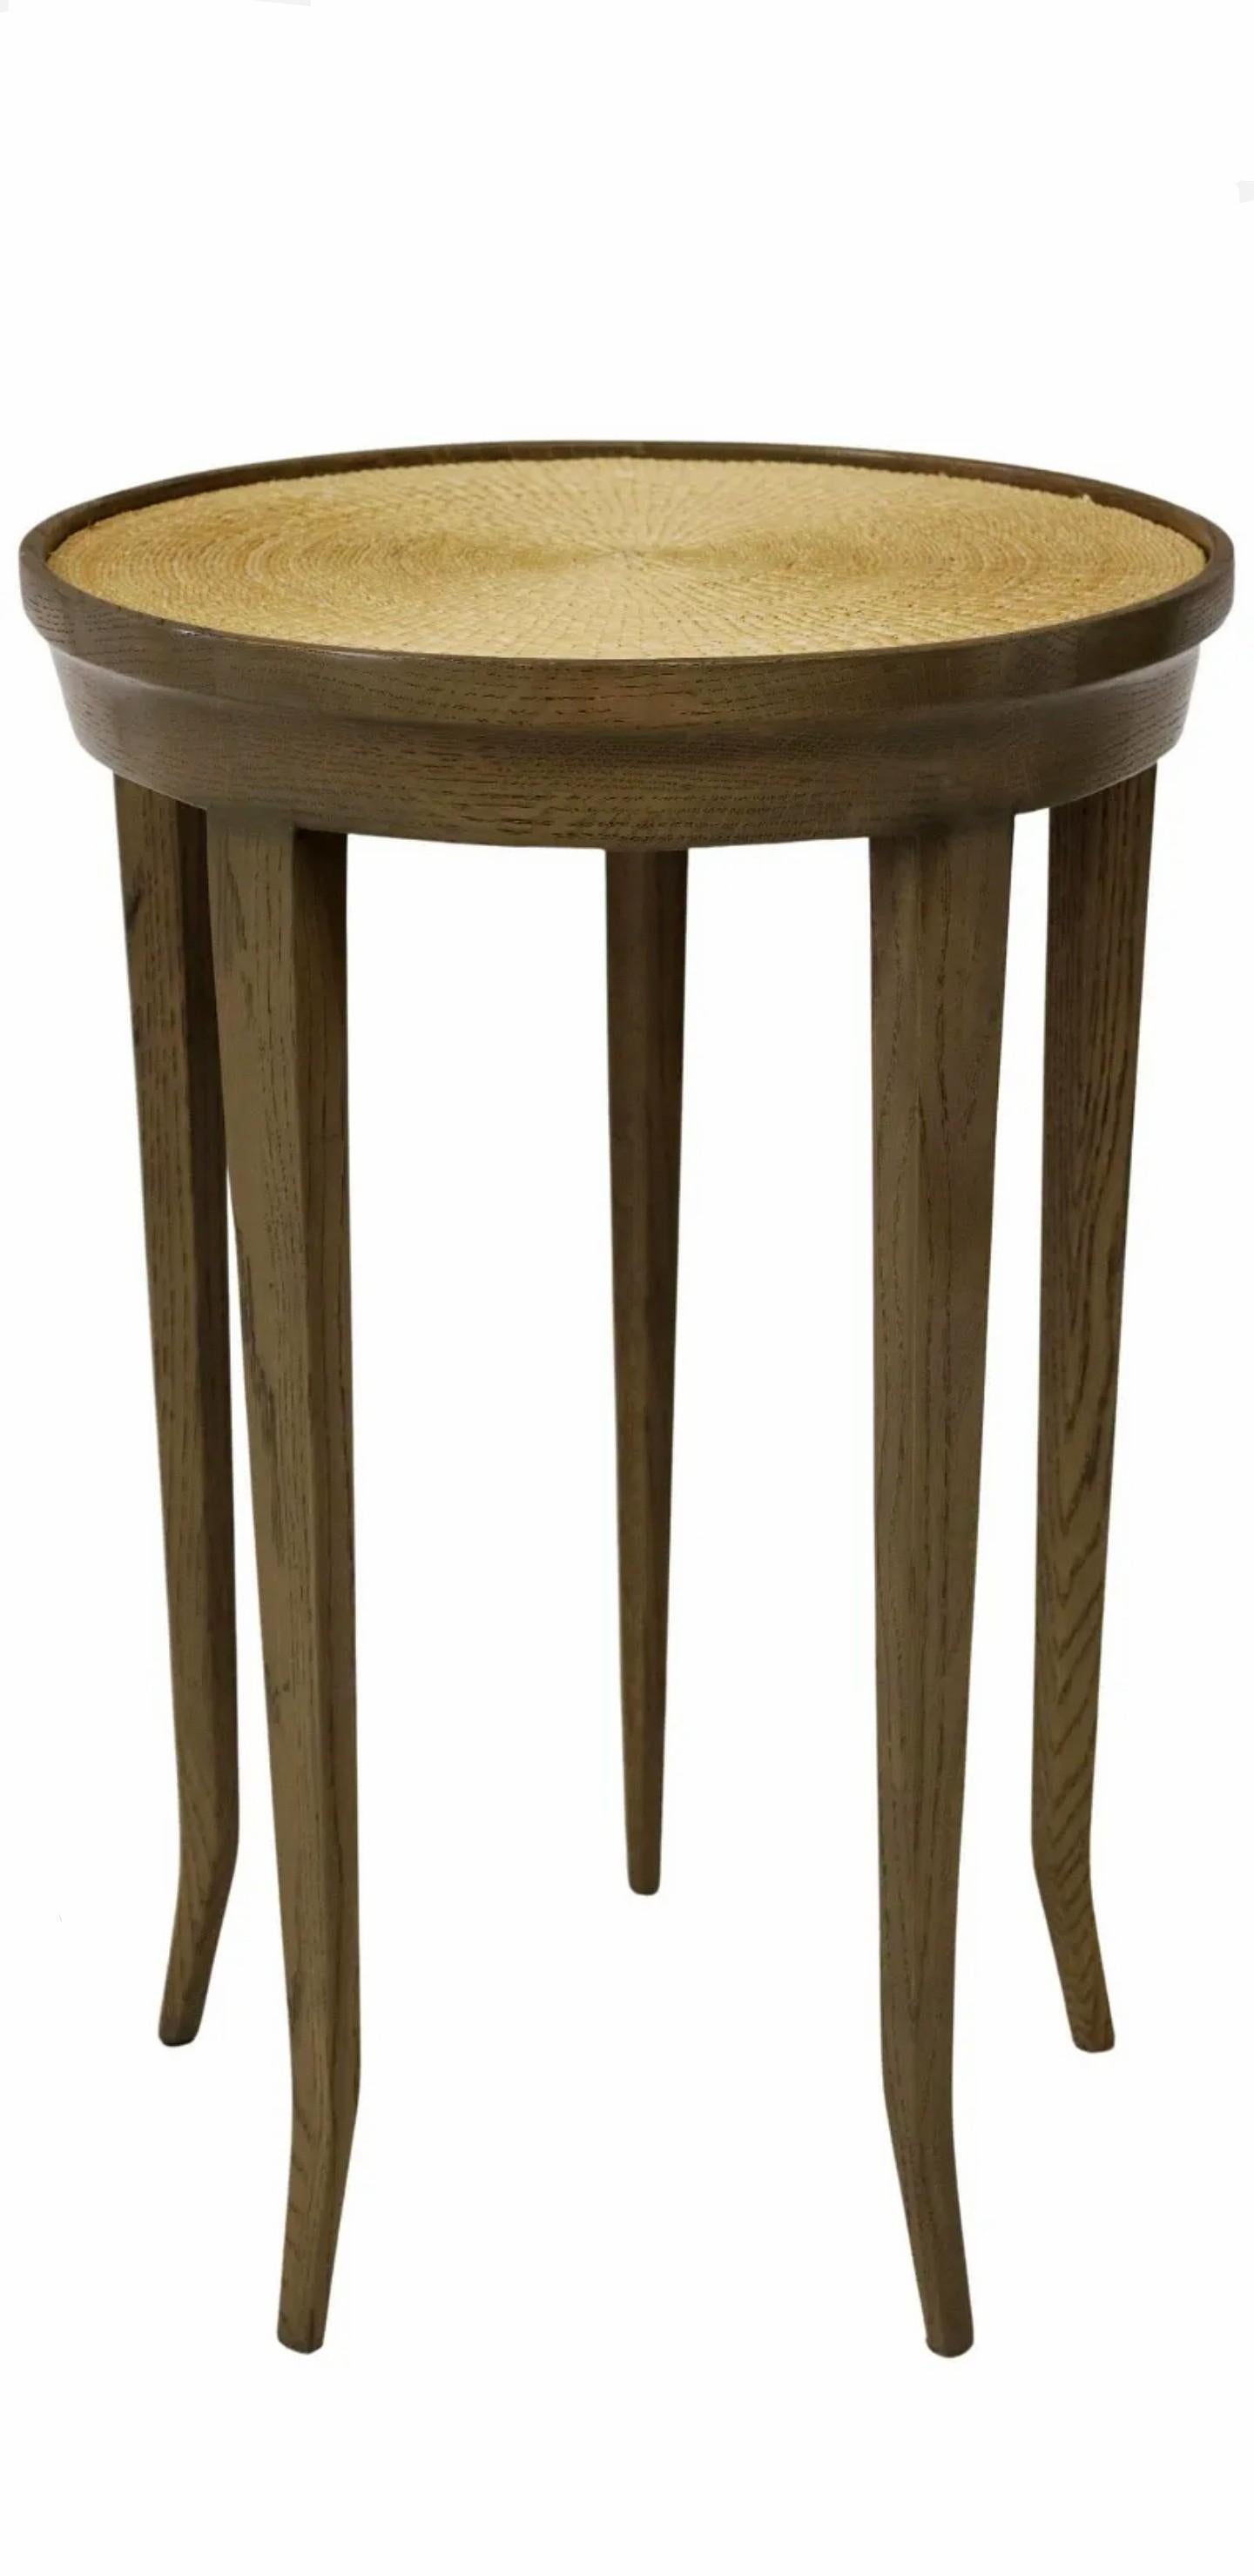 20th Century Five Leg Painted Wood & Wicker Occasional Table For Sale